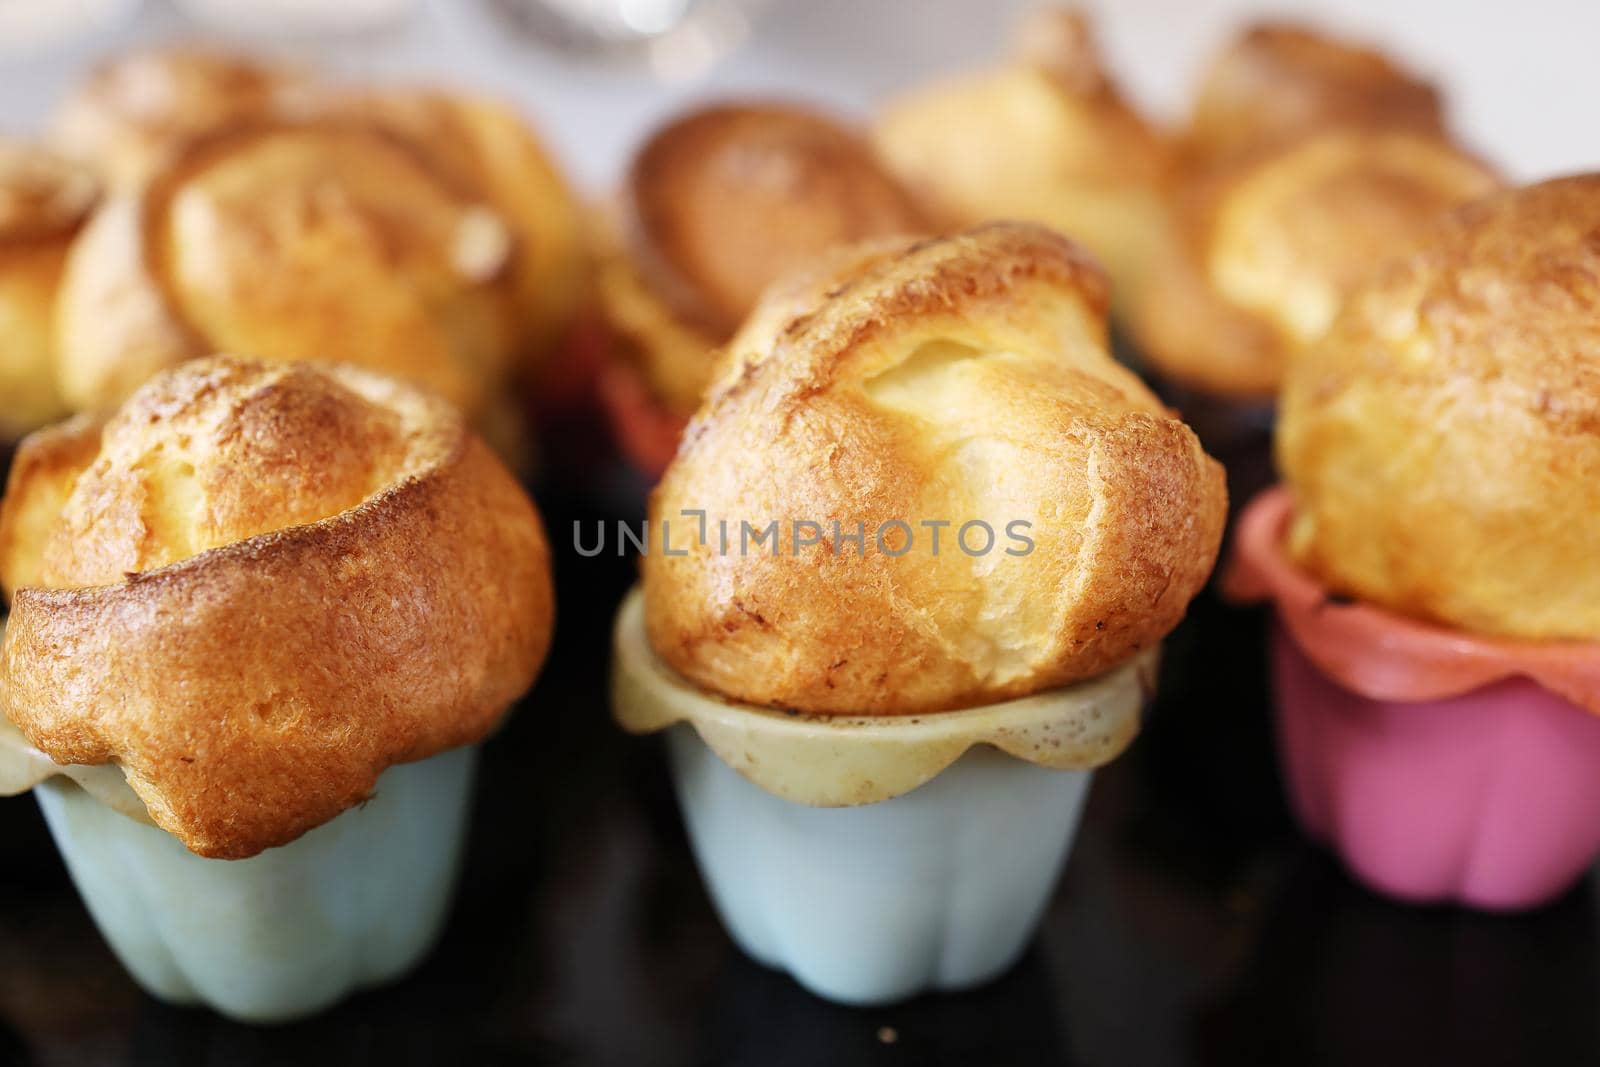 Homemade popover, which is a lush, airy and egg hollow roll, fresh from the oven. Yorkshire pudding freshly baked in silicone blue and pink baking dishes, selective focus